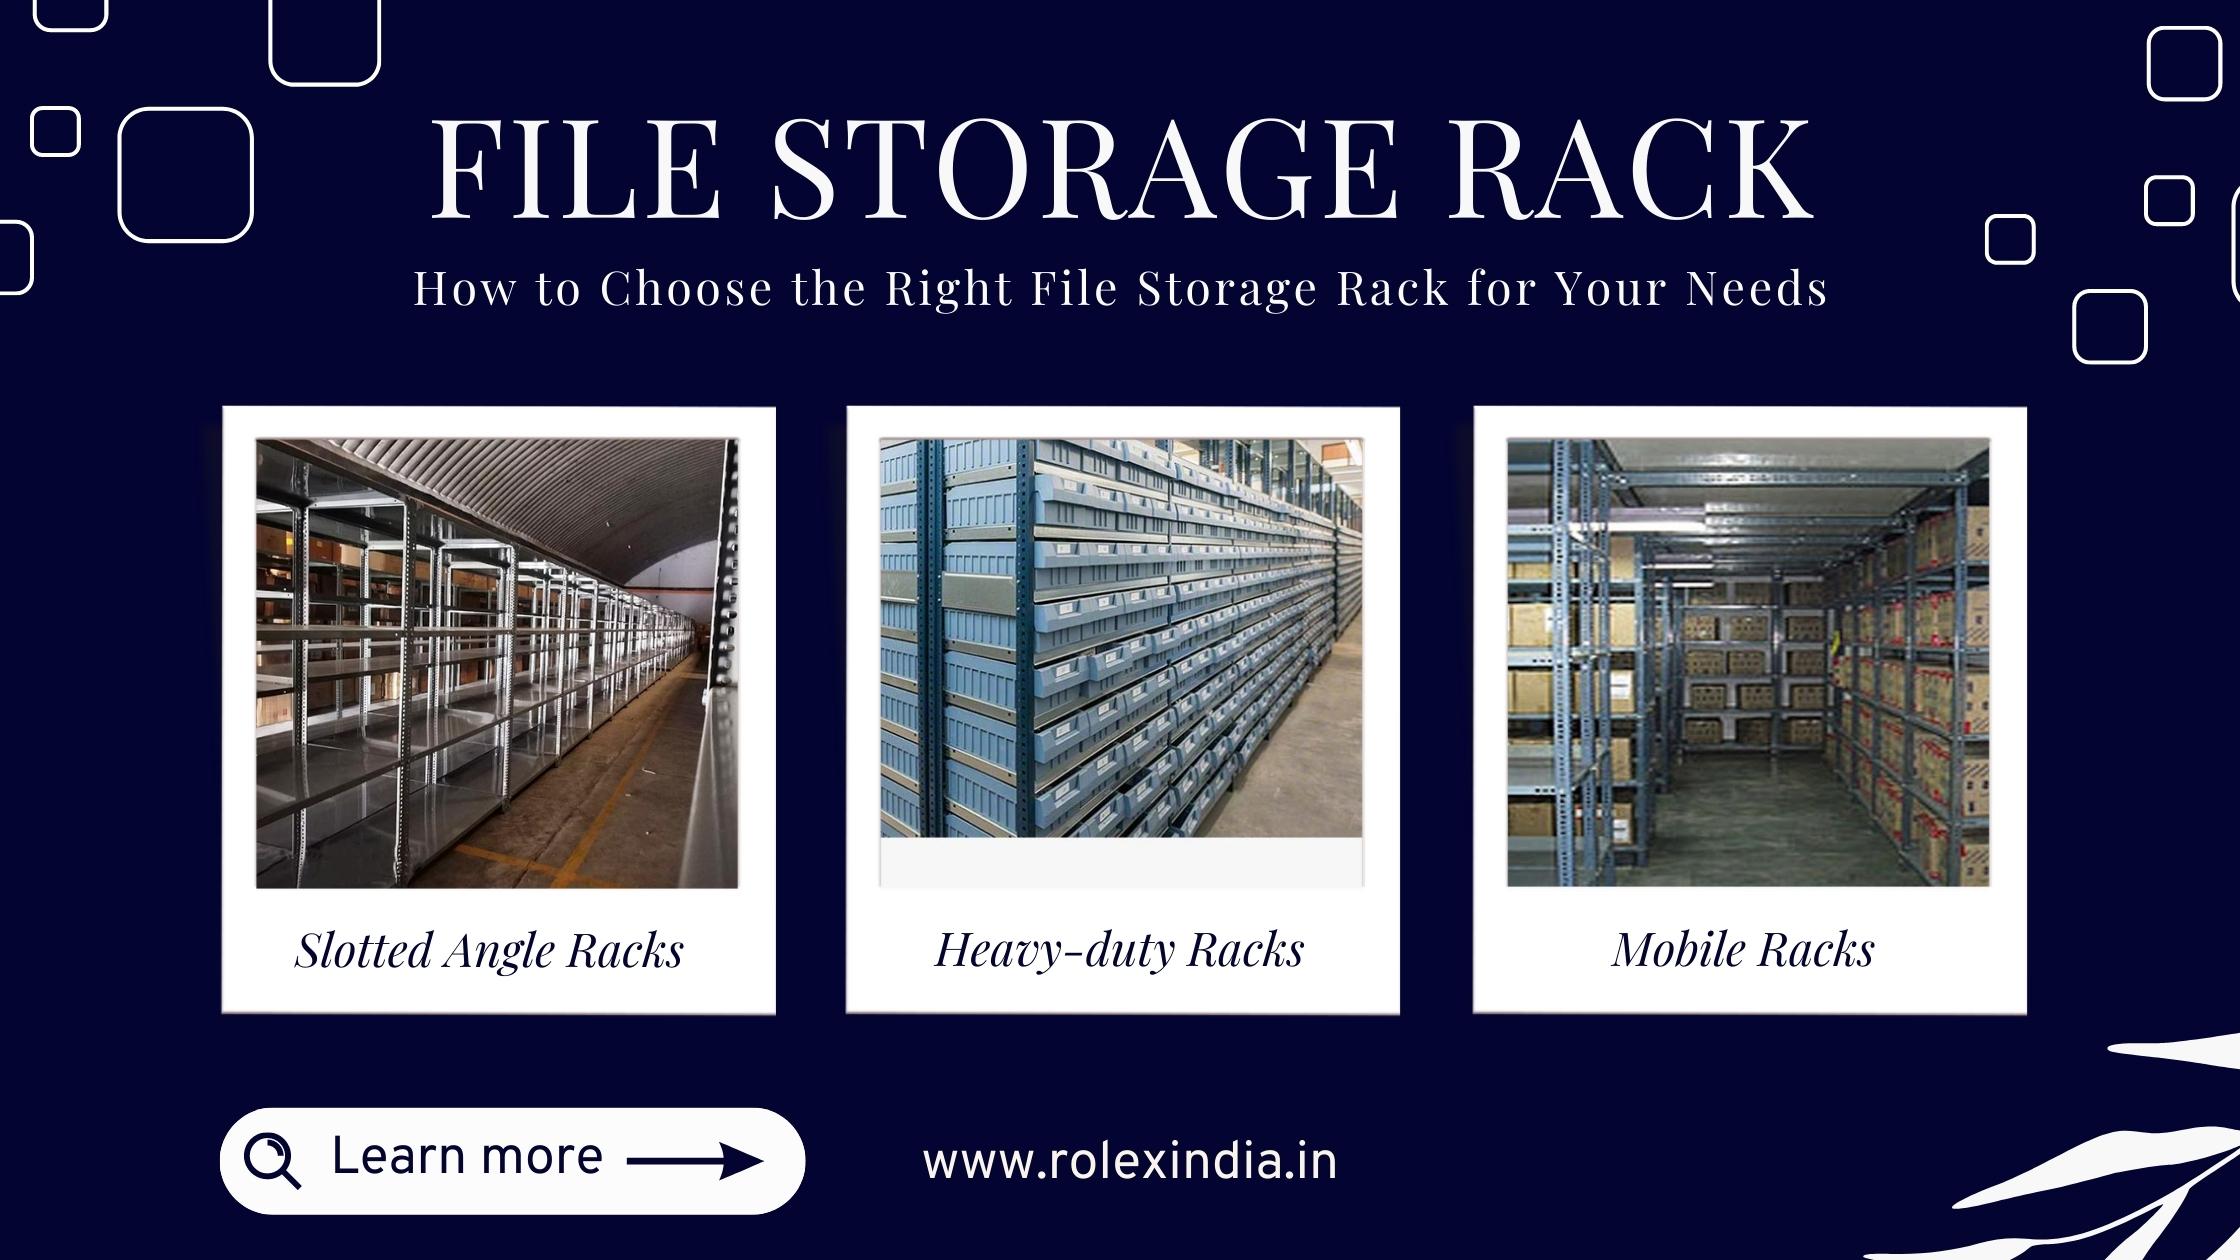 How to Choose the Right File Storage Rack for Your Needs